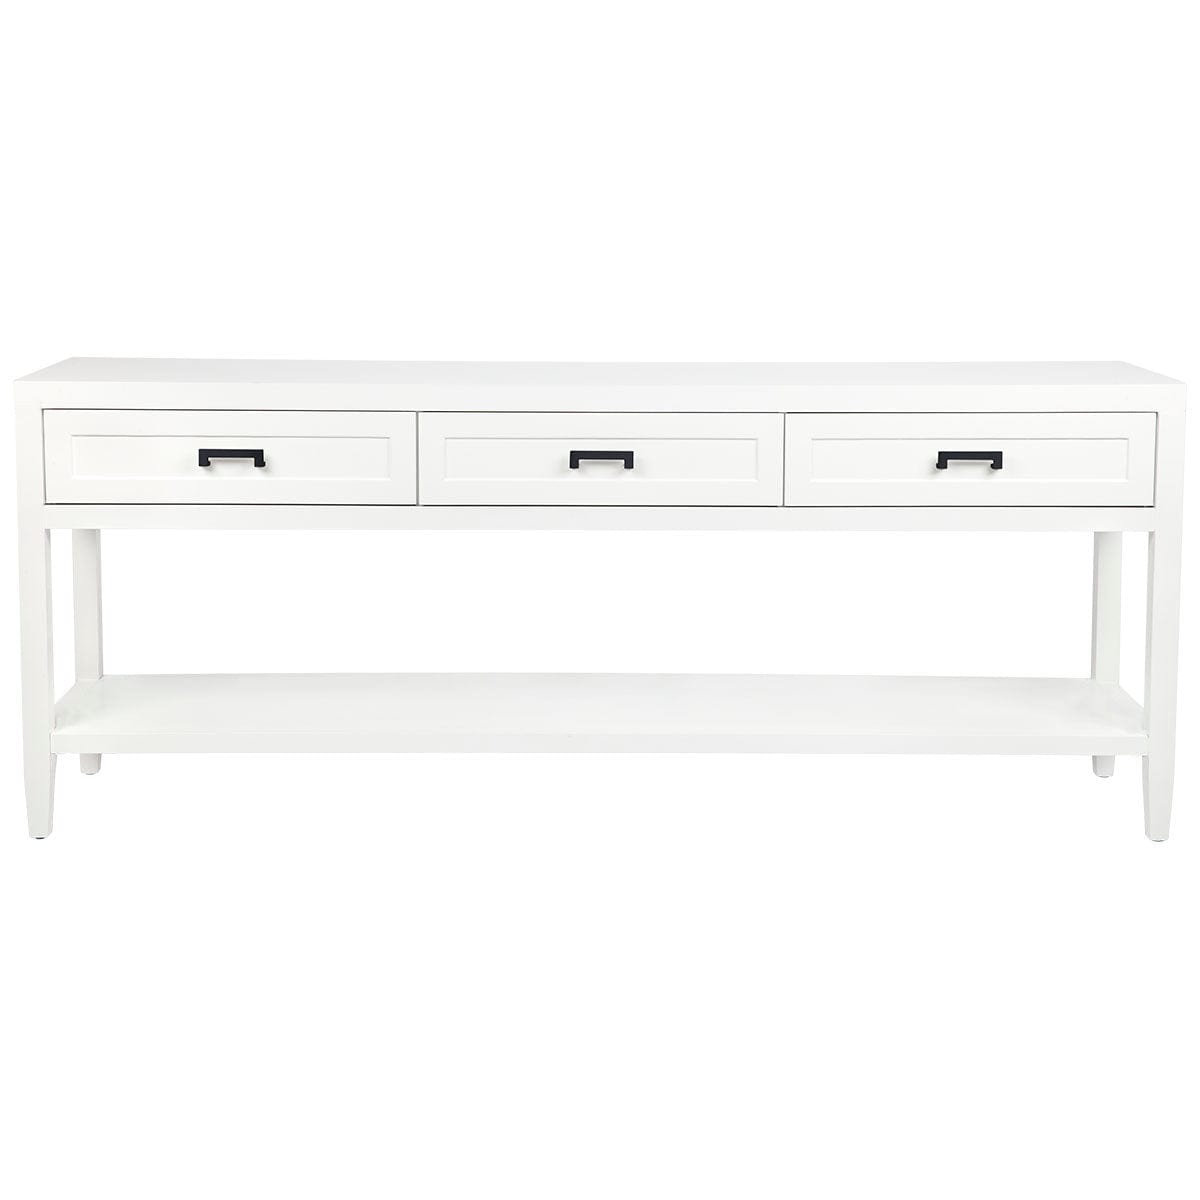 Cafe Lighting & Living Soloman Console Table - Large White